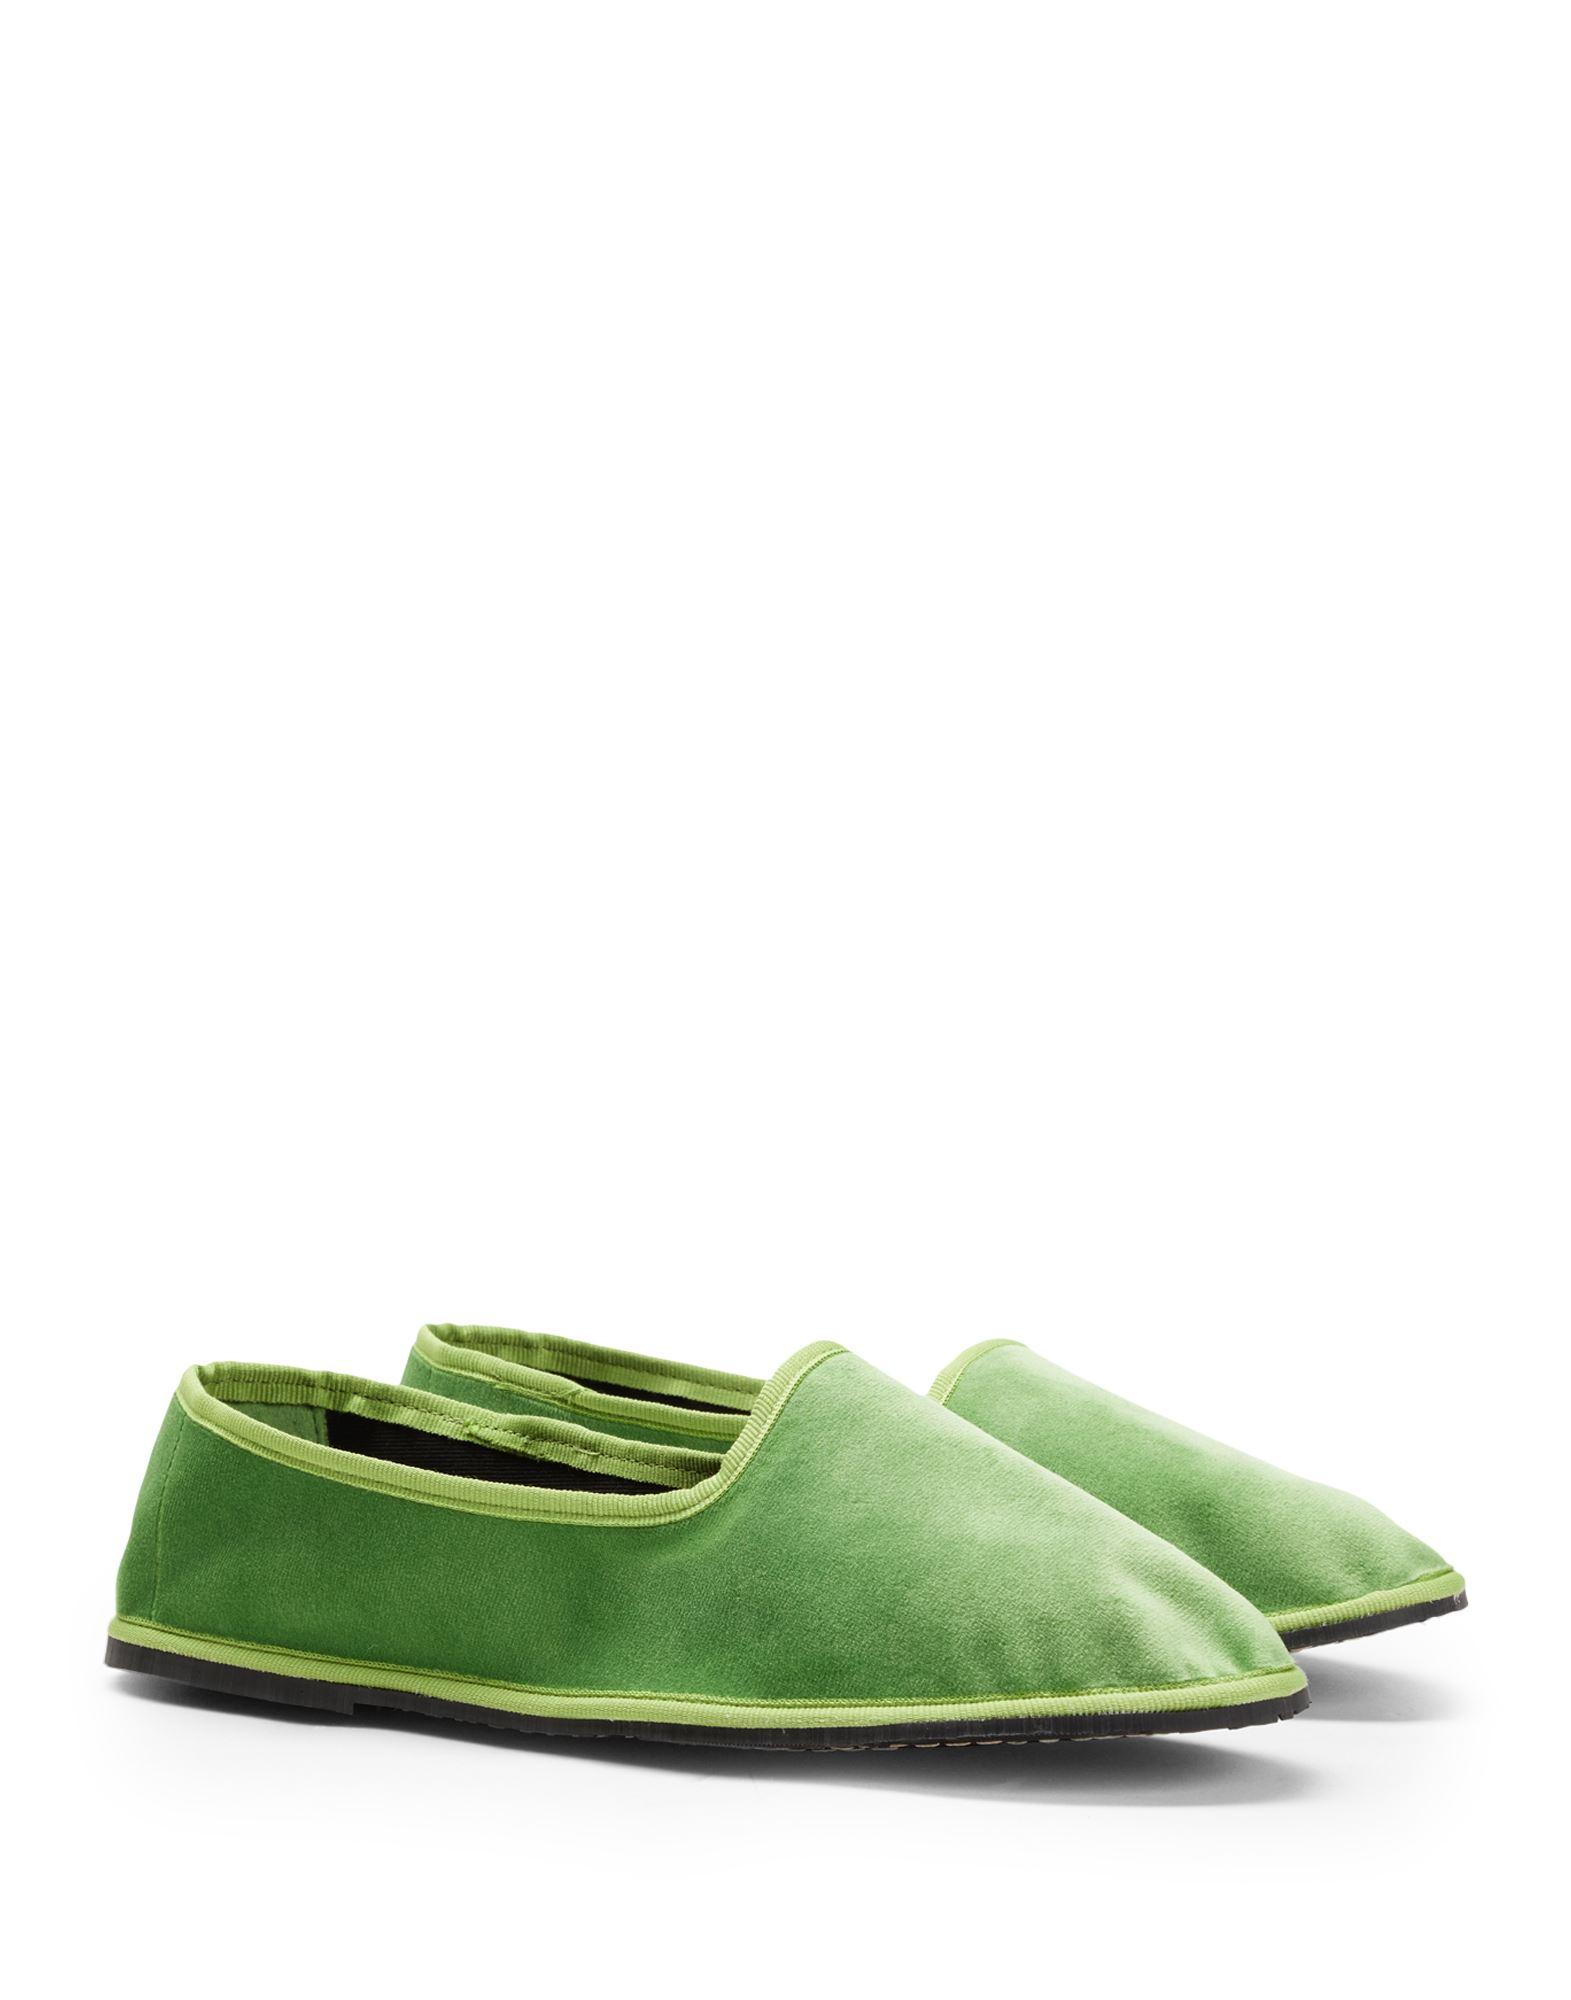 8 by YOOX Loafer in Acid Green (Green) | Lyst